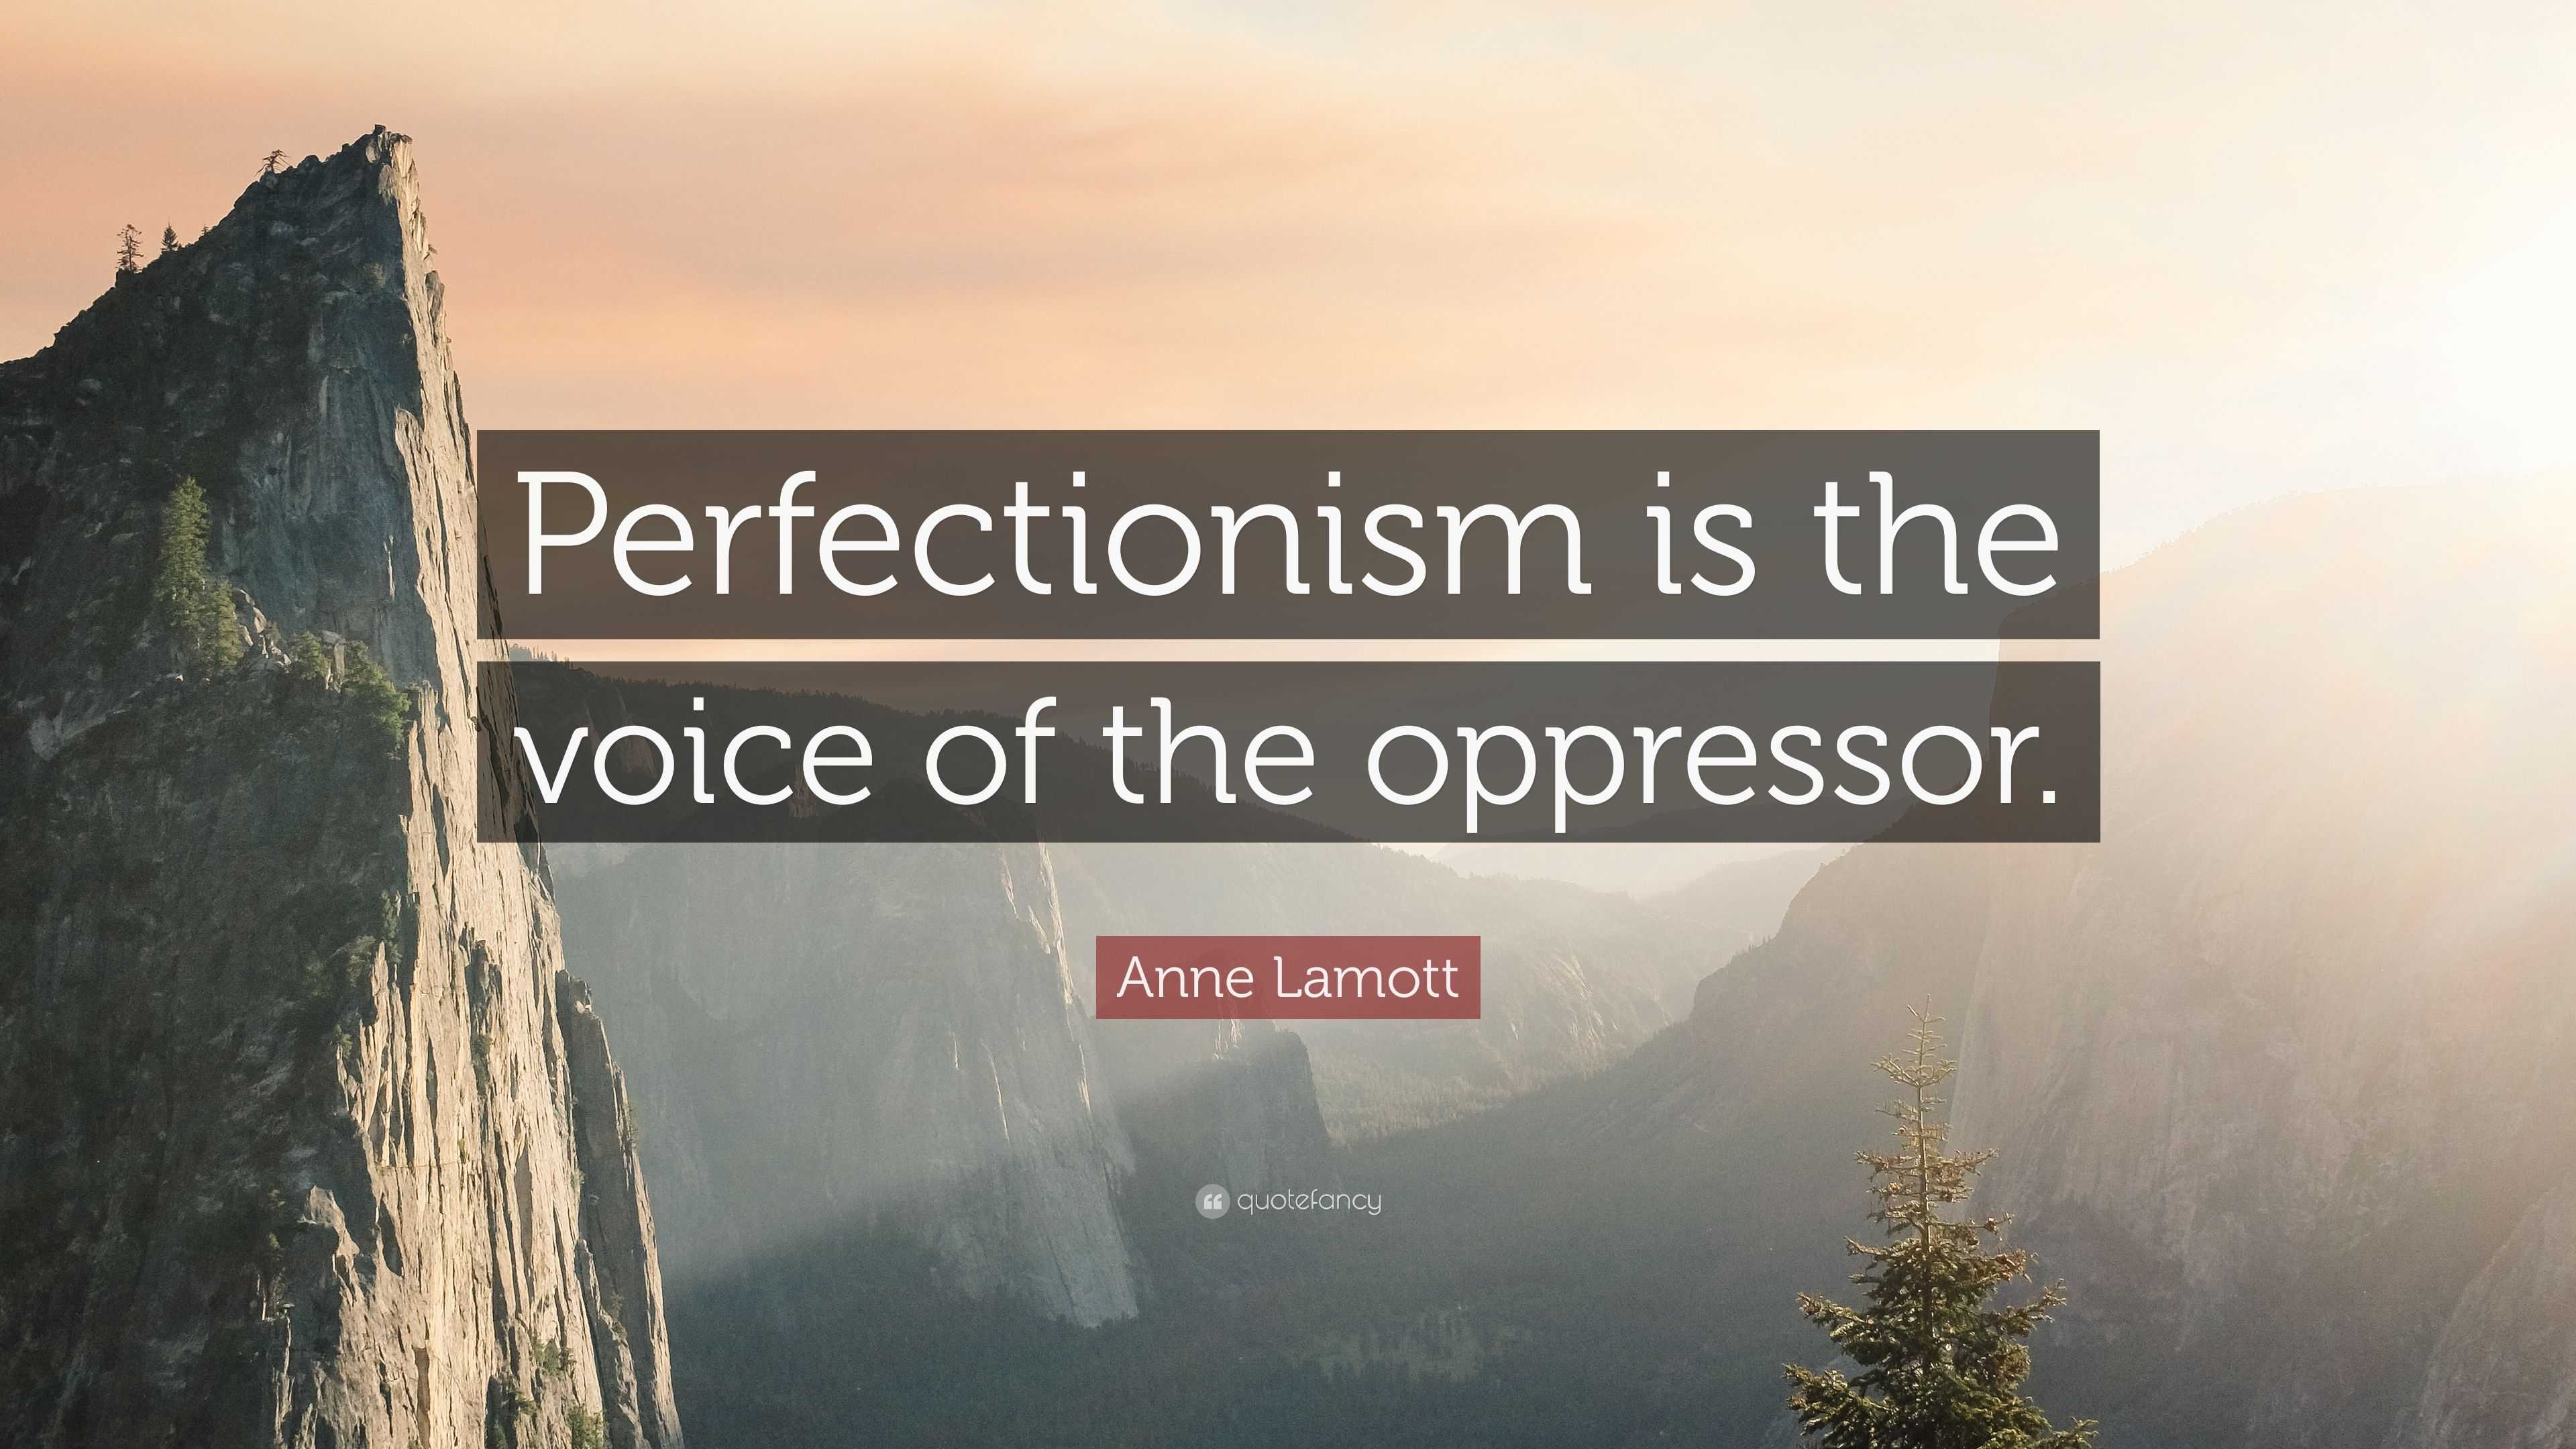 4796857 Anne Lamott Quote Perfectionism is the voice of the oppressor